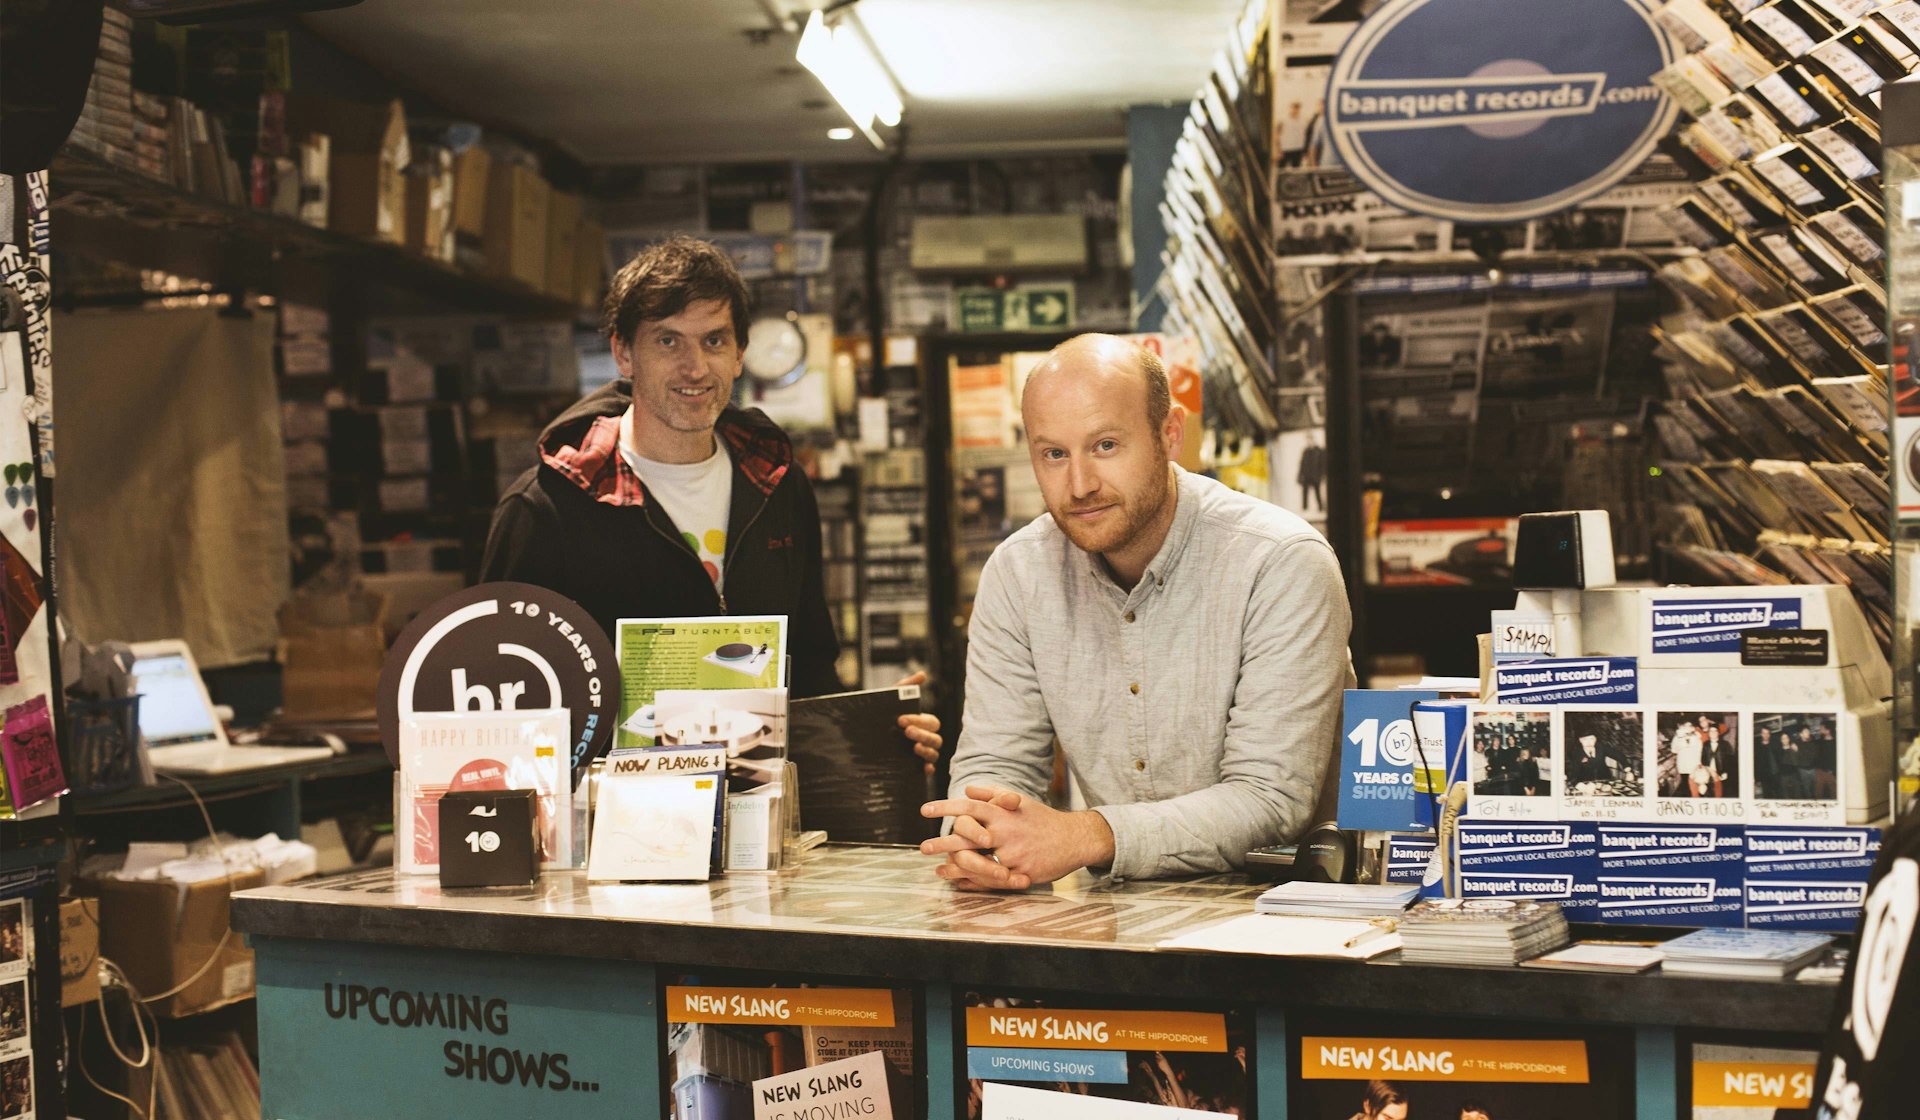 How Banquet Records turned a failing music shop into the beating heart of a local scene